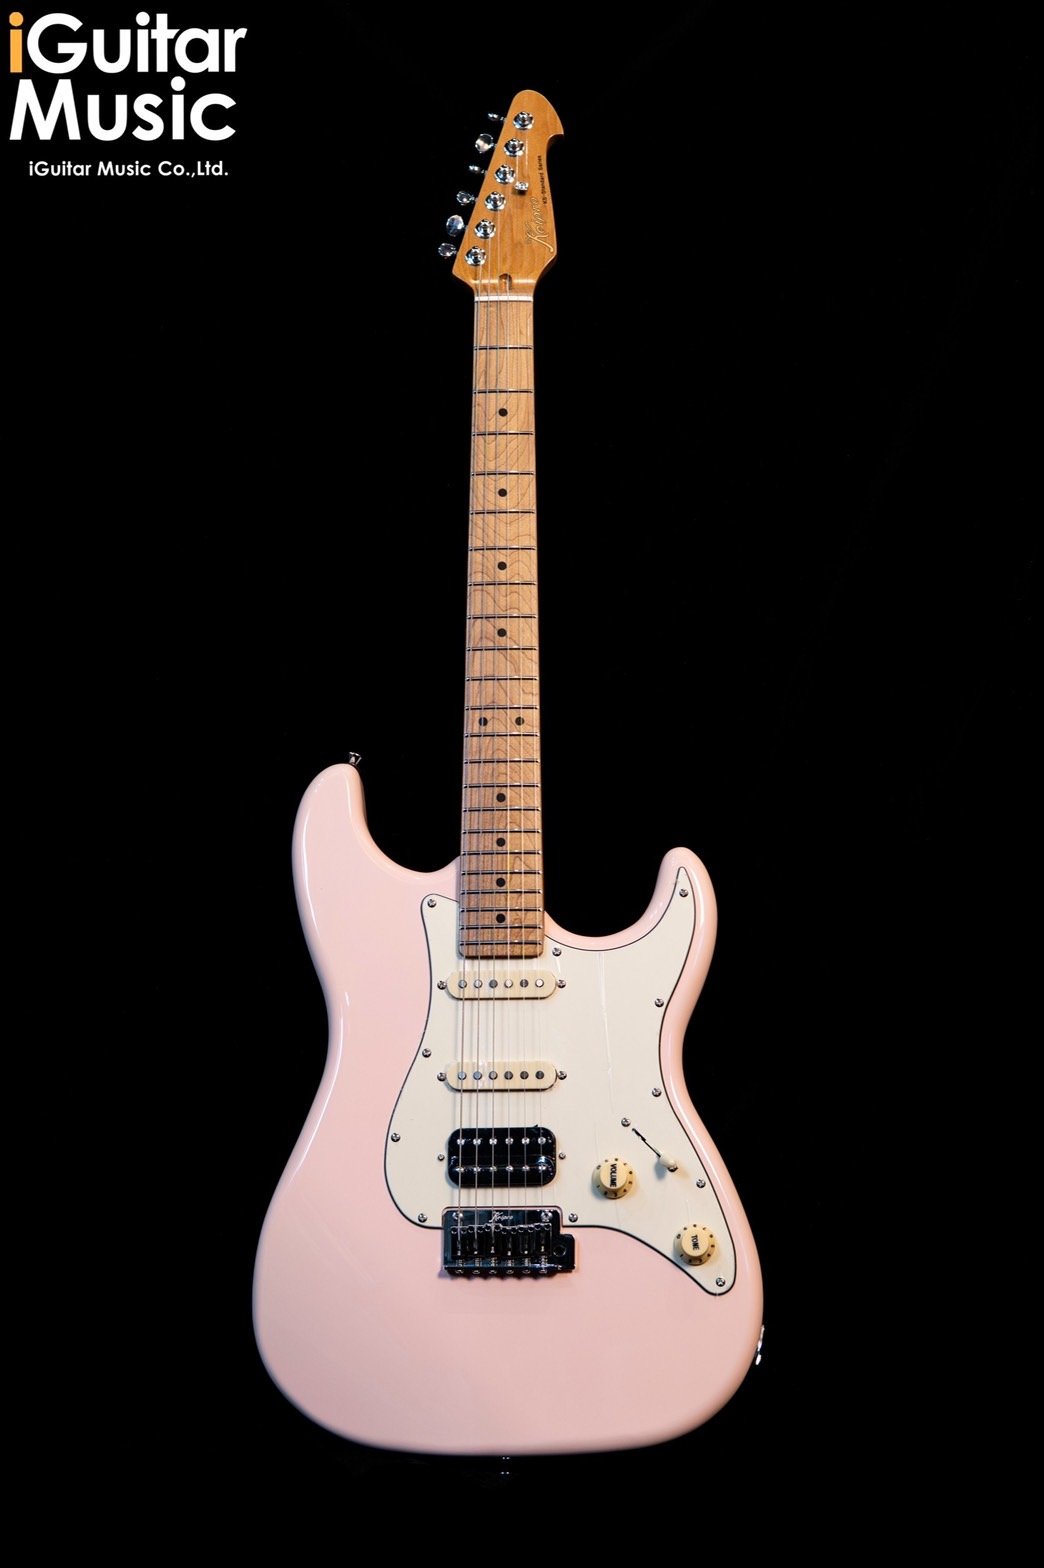 Keipro Standard Series KS-150M HSS - Shell Pink - Roasted Maple Neck